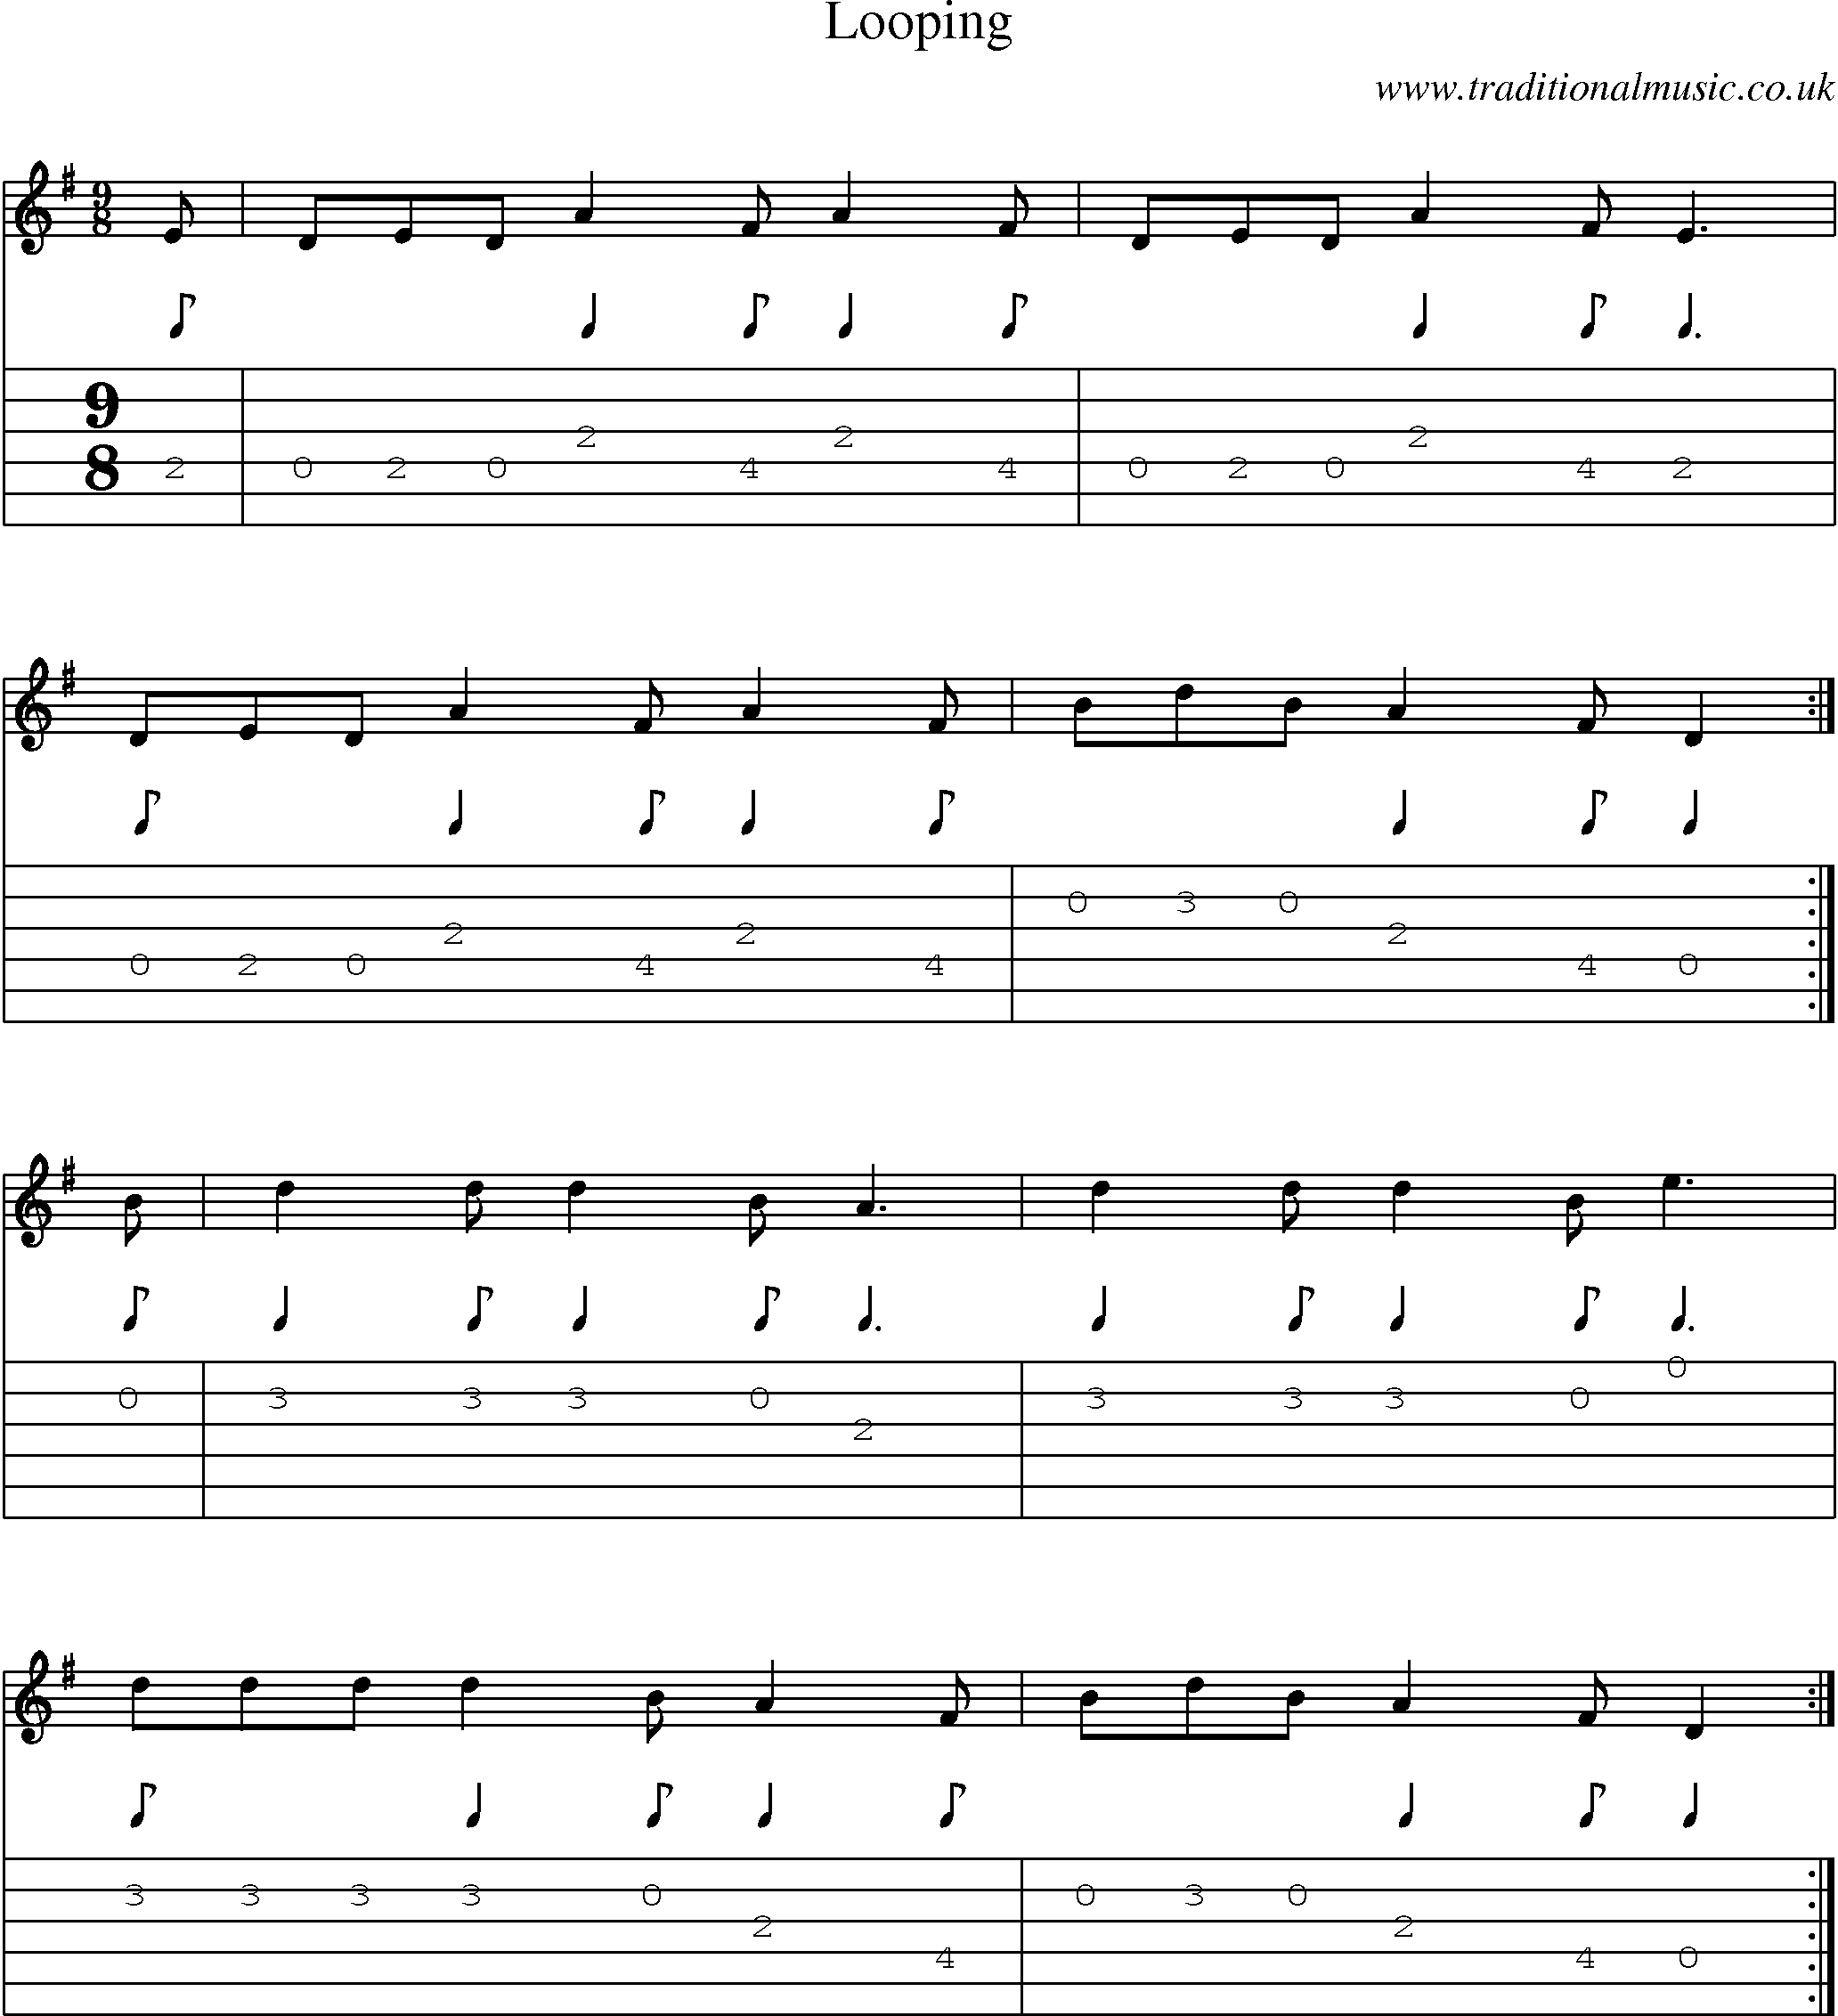 Music Score and Guitar Tabs for Looping